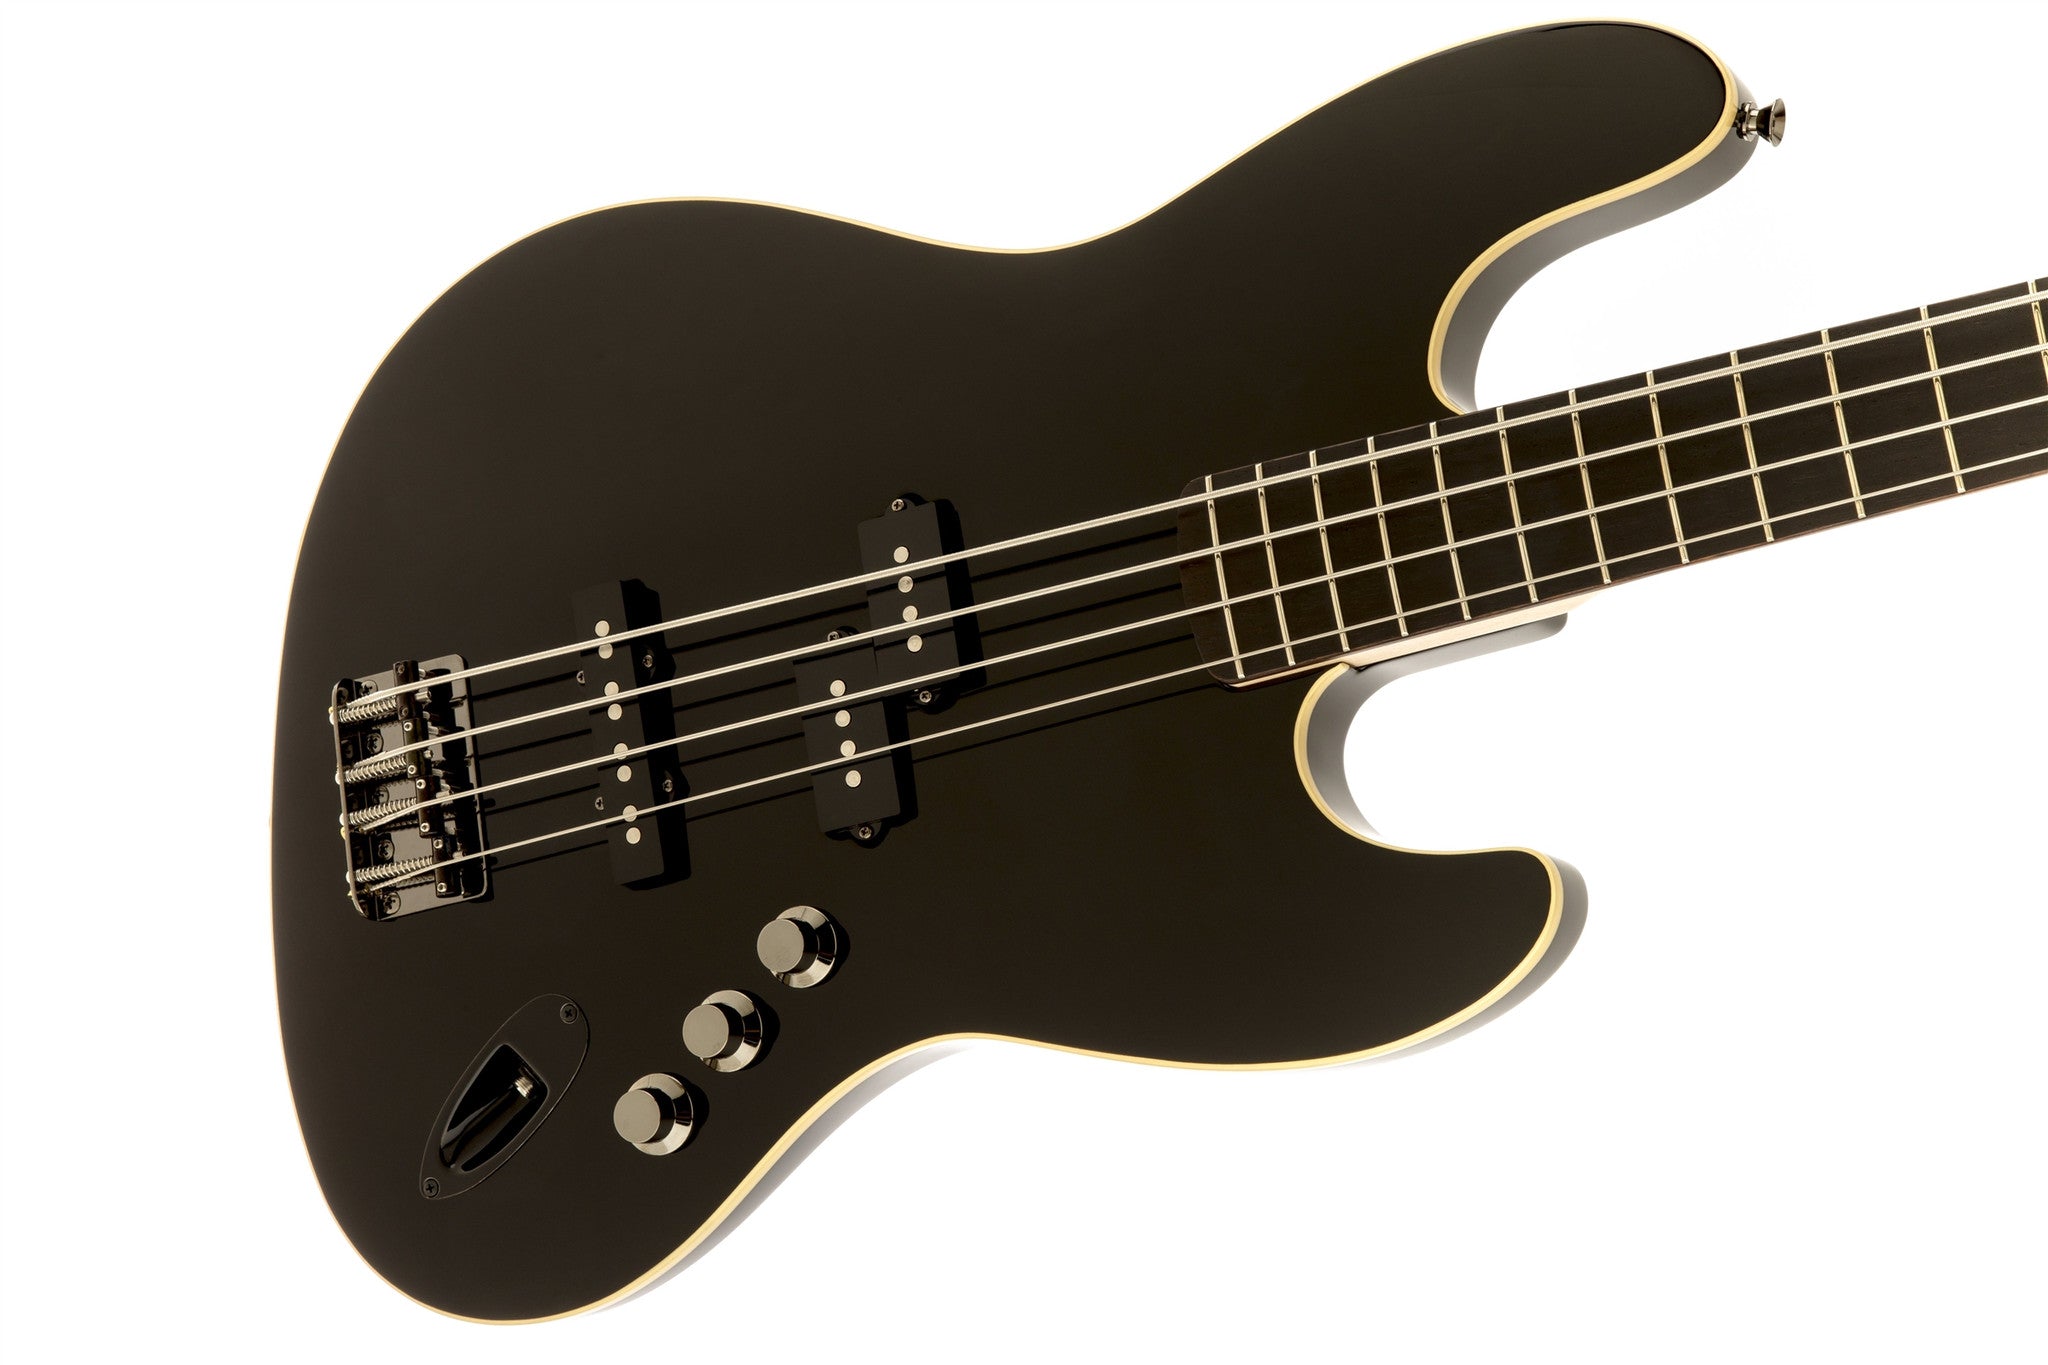 Fender Aerodyne™ Jazz Bass®, Rosewood Stained Fingerboard, Black, No Pickguard 0254505506 - L.A. Music - Canada's Favourite Music Store!